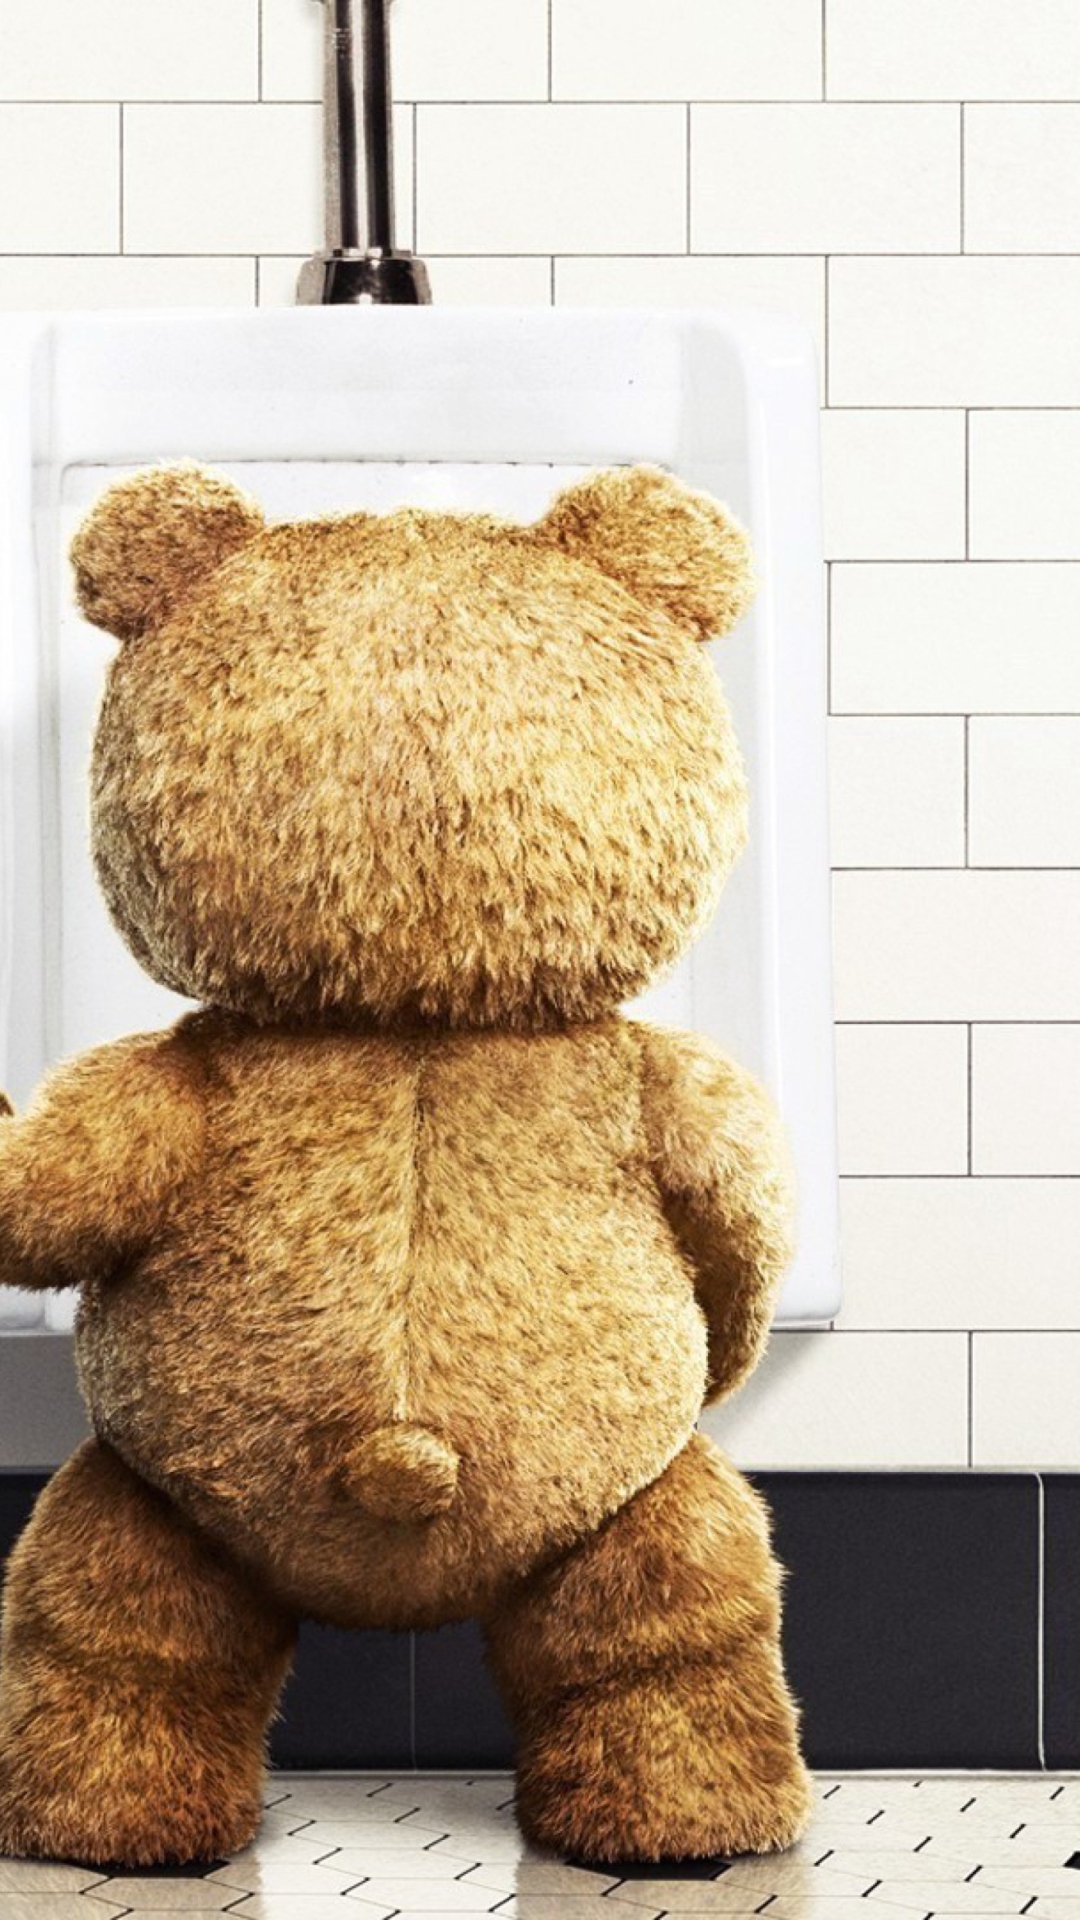 Ted Poster Wallpaper For Iphone 7 Plus